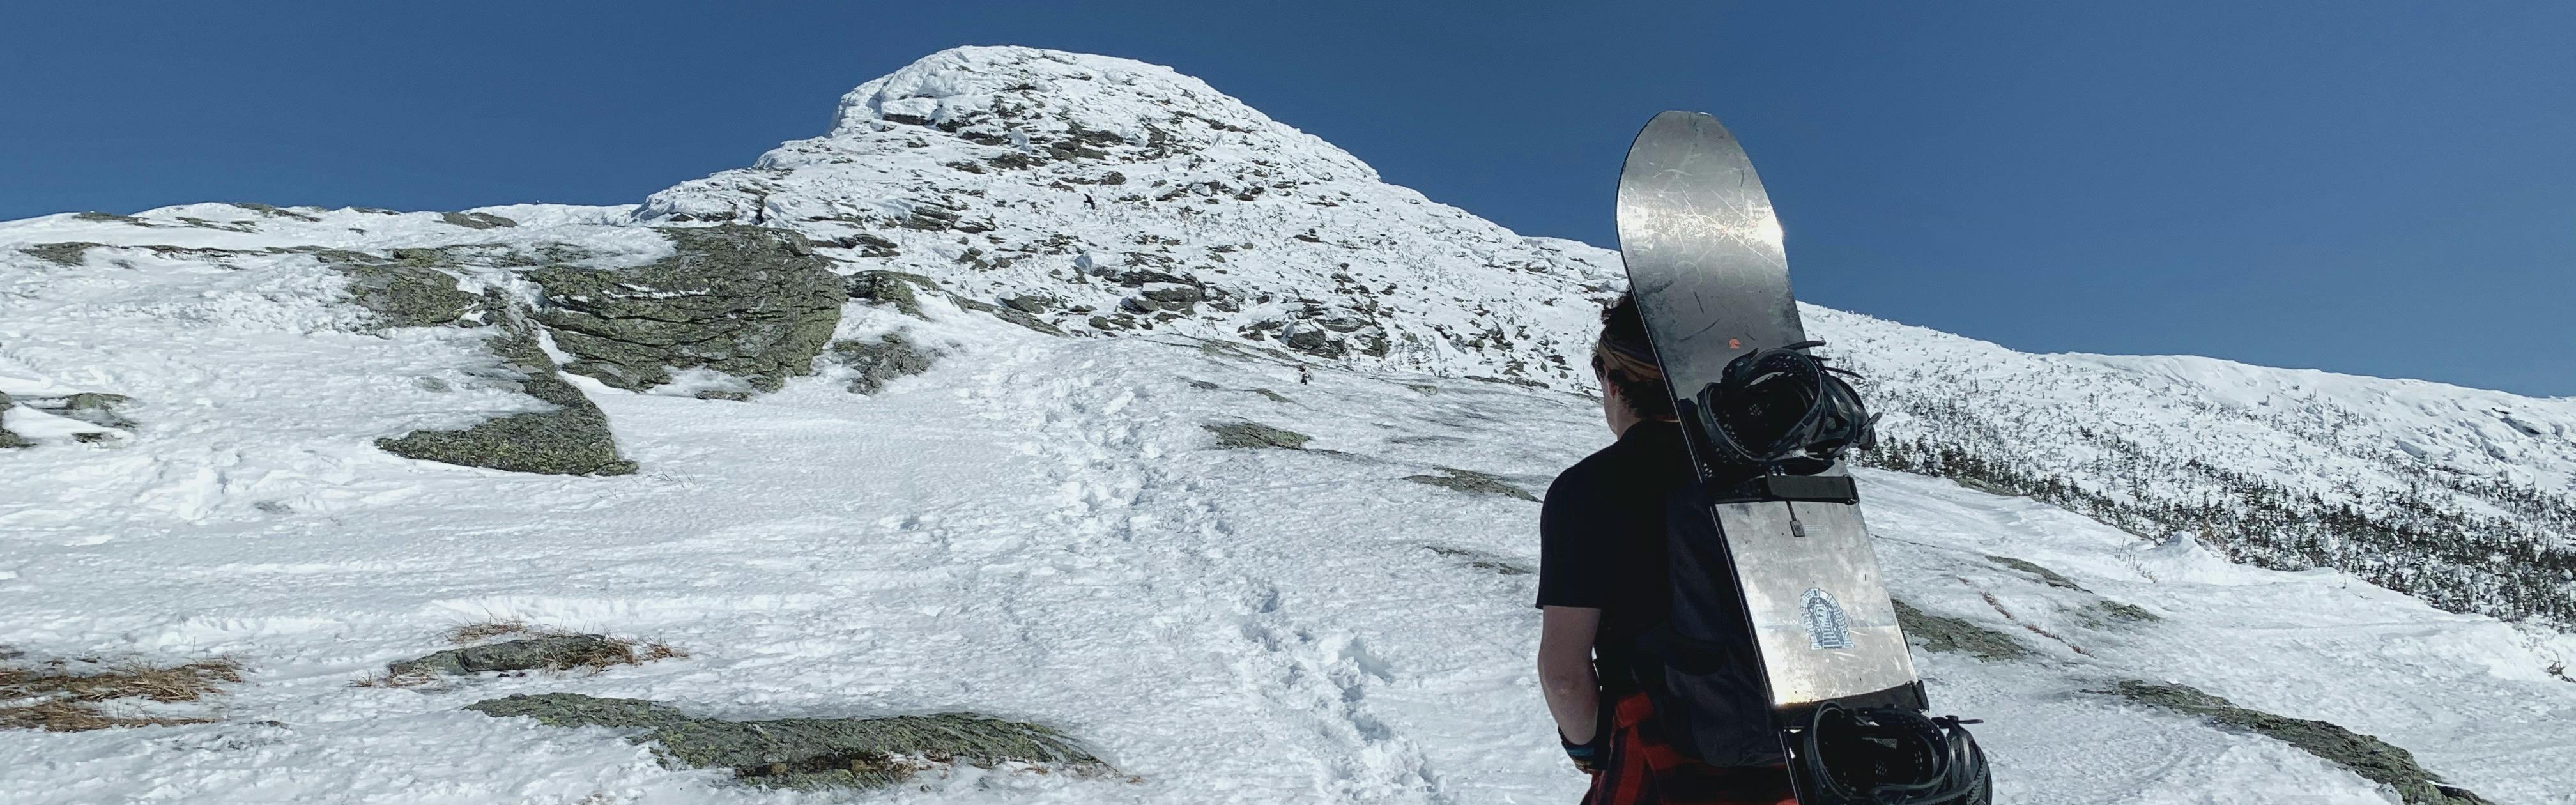 A man hikes up a mountain with a snowboard on his back